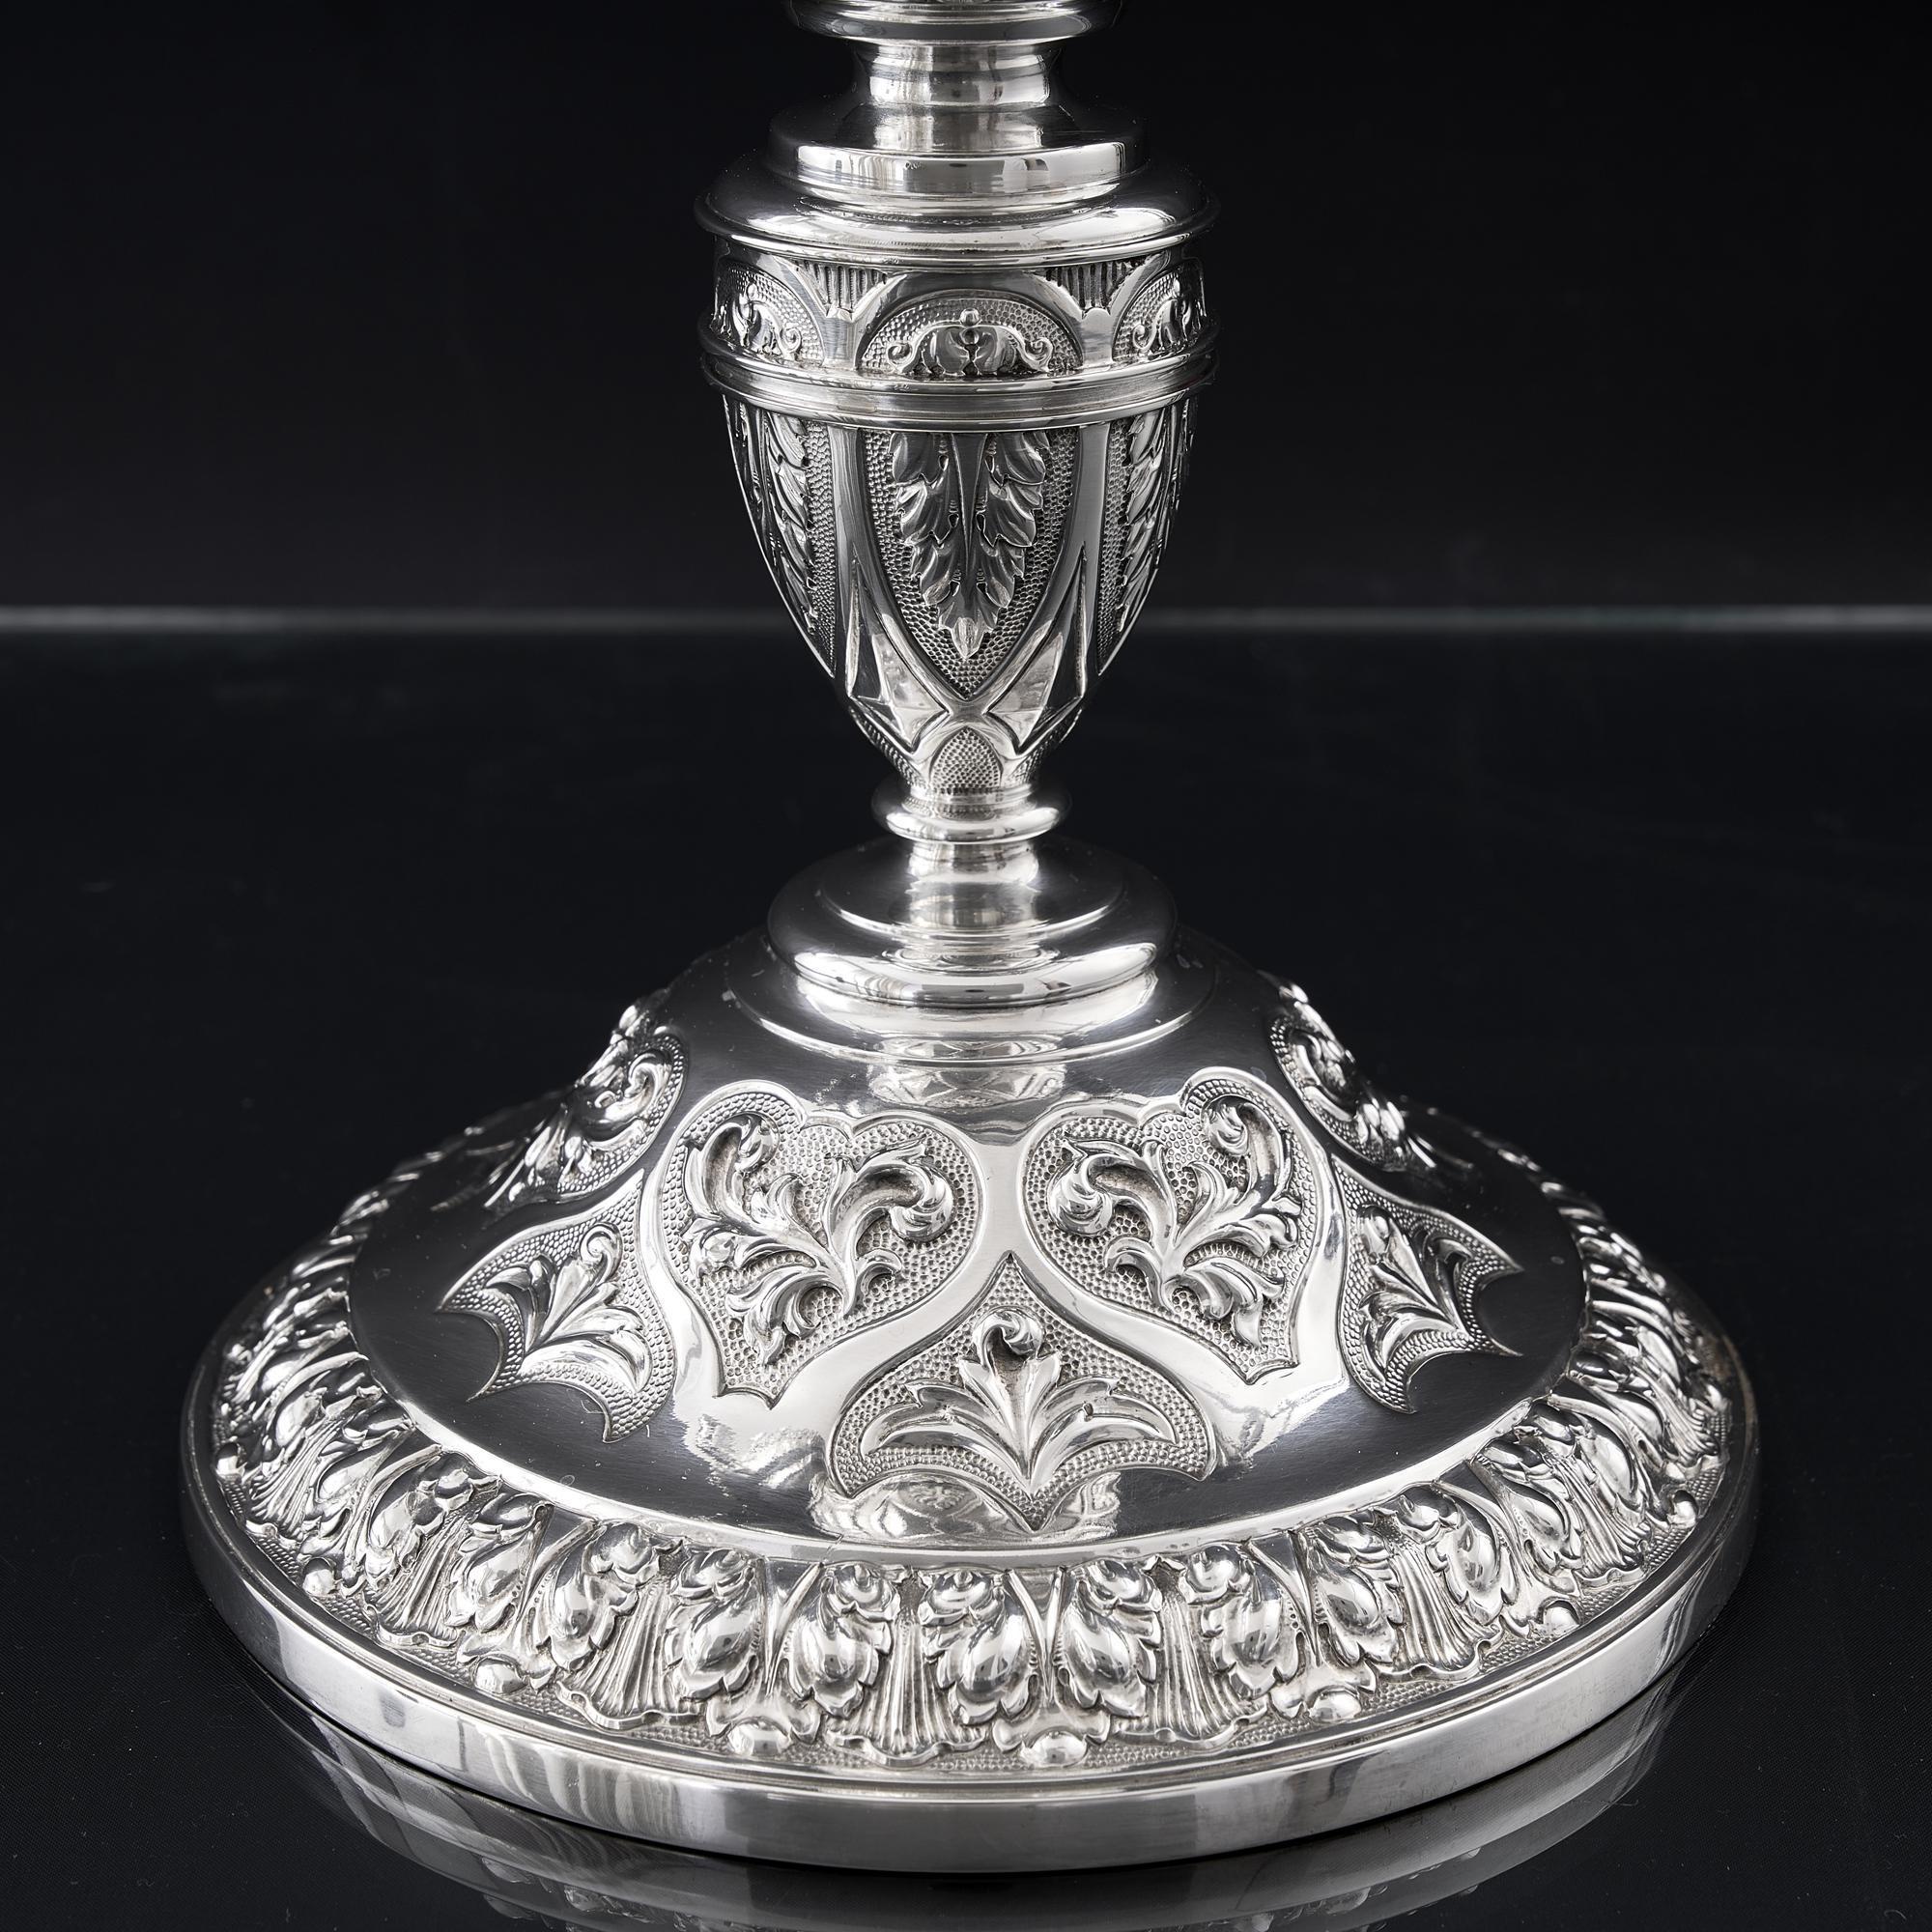 Sterling Silver Two-handled antique sterling silver trophy comport